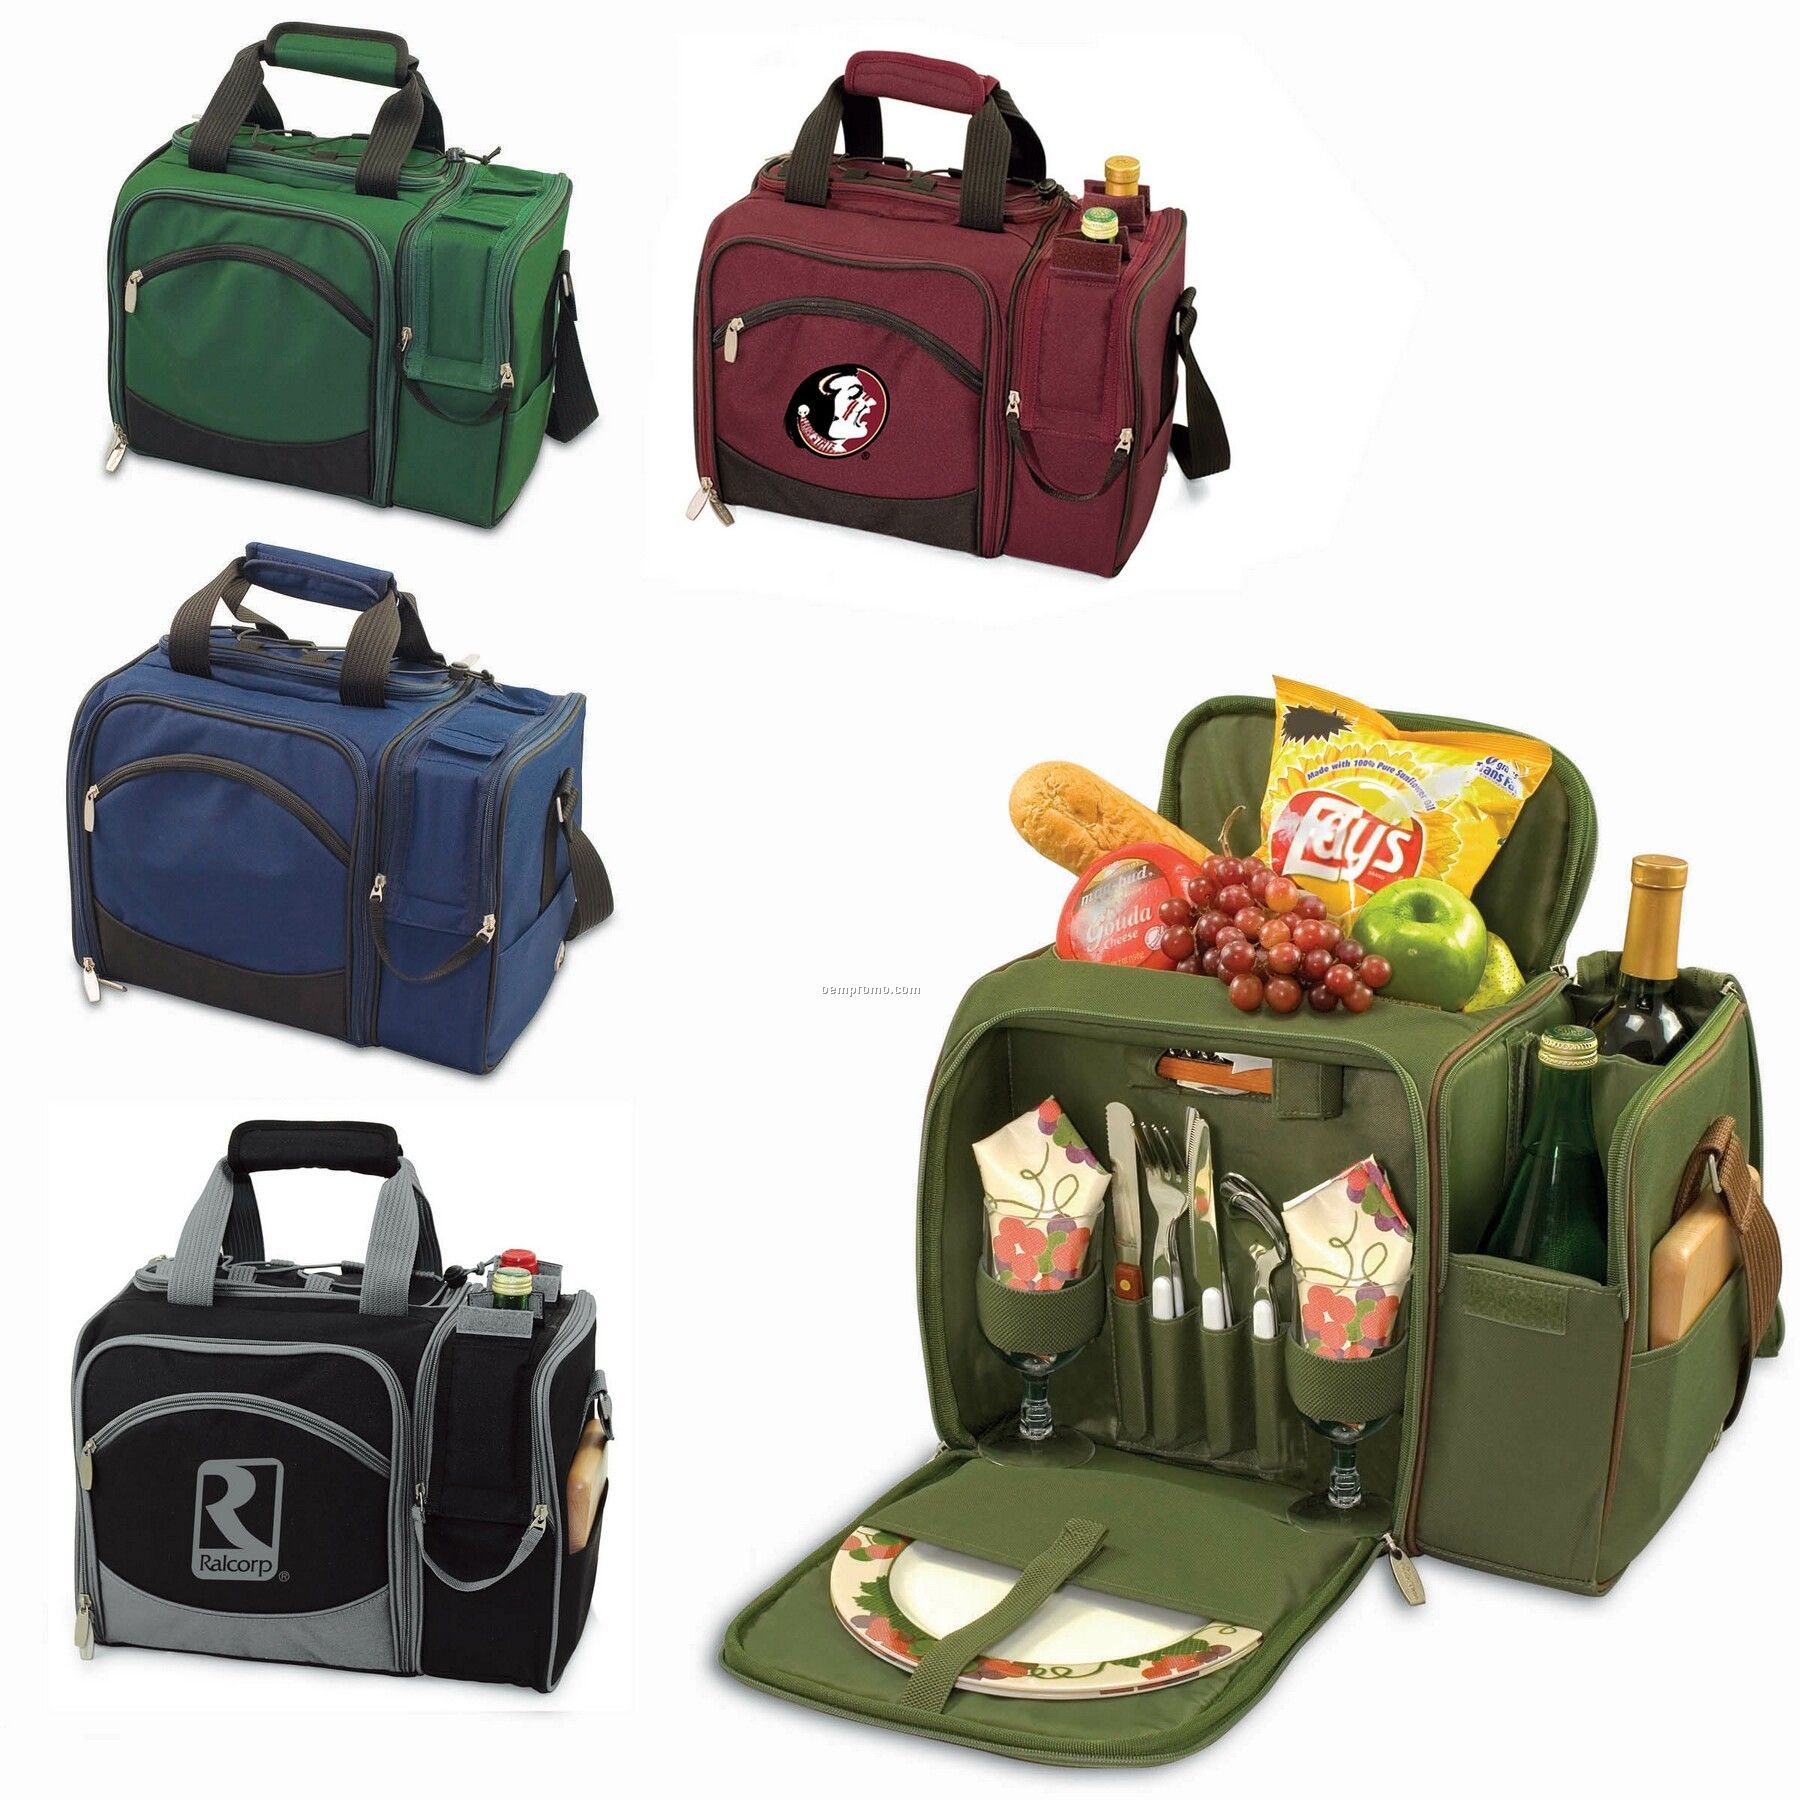 Malibu Picnic Cooler Shoulder Pack W/ Svc. For 2 - Solids (12 Can)